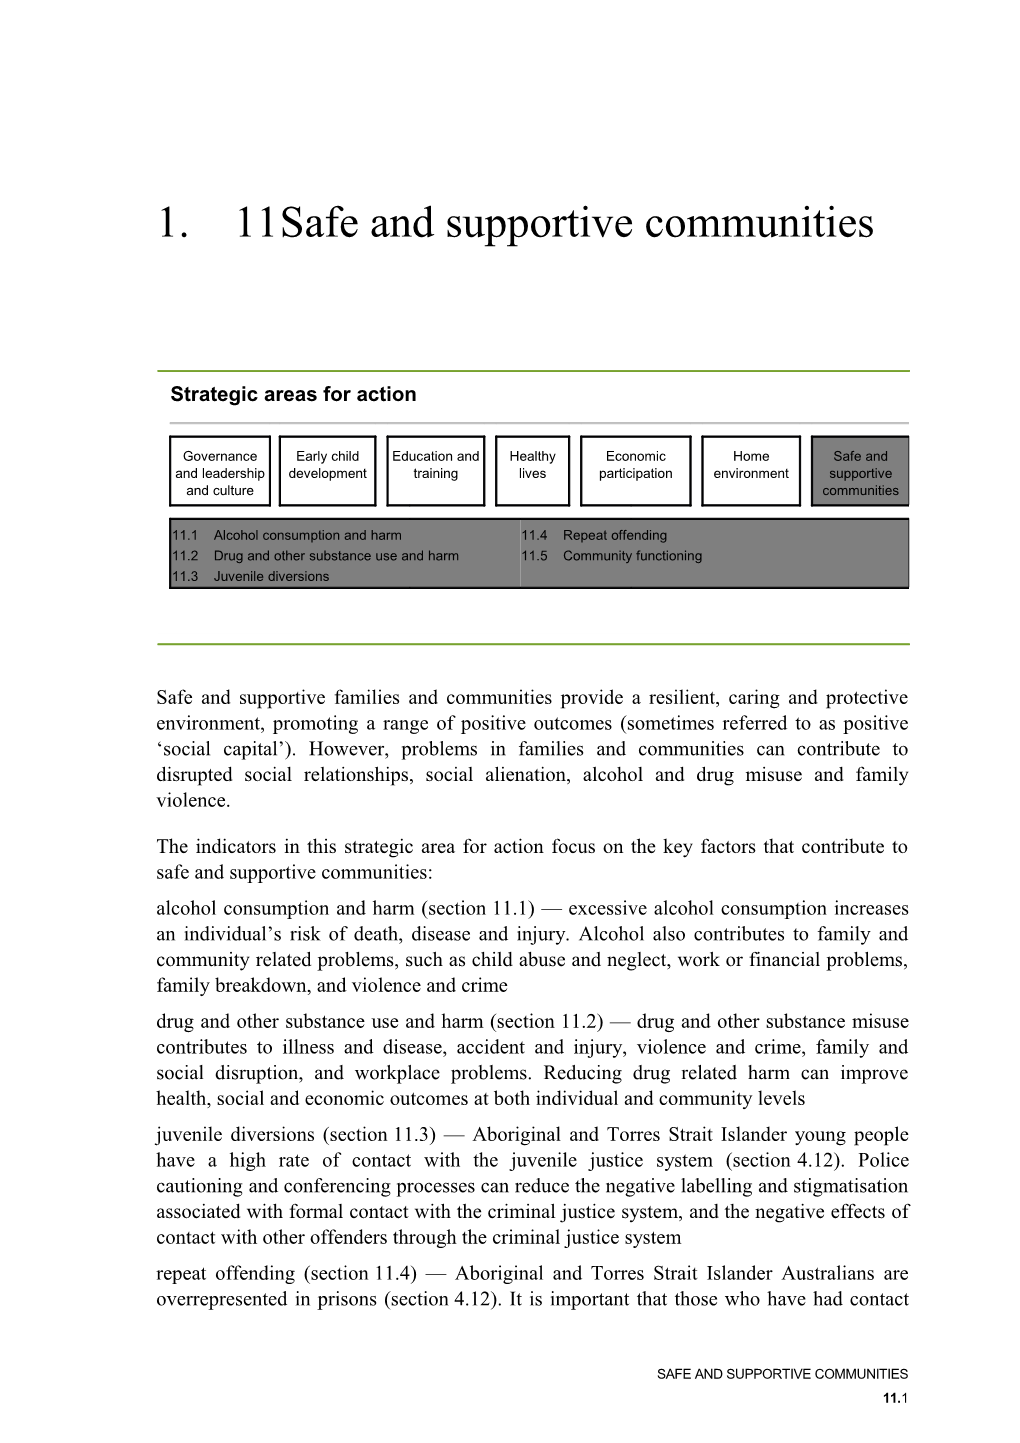 Chapter 11 Safe and Supportive Communities - Overcoming Indigenous Disadvantage - Key Indicators